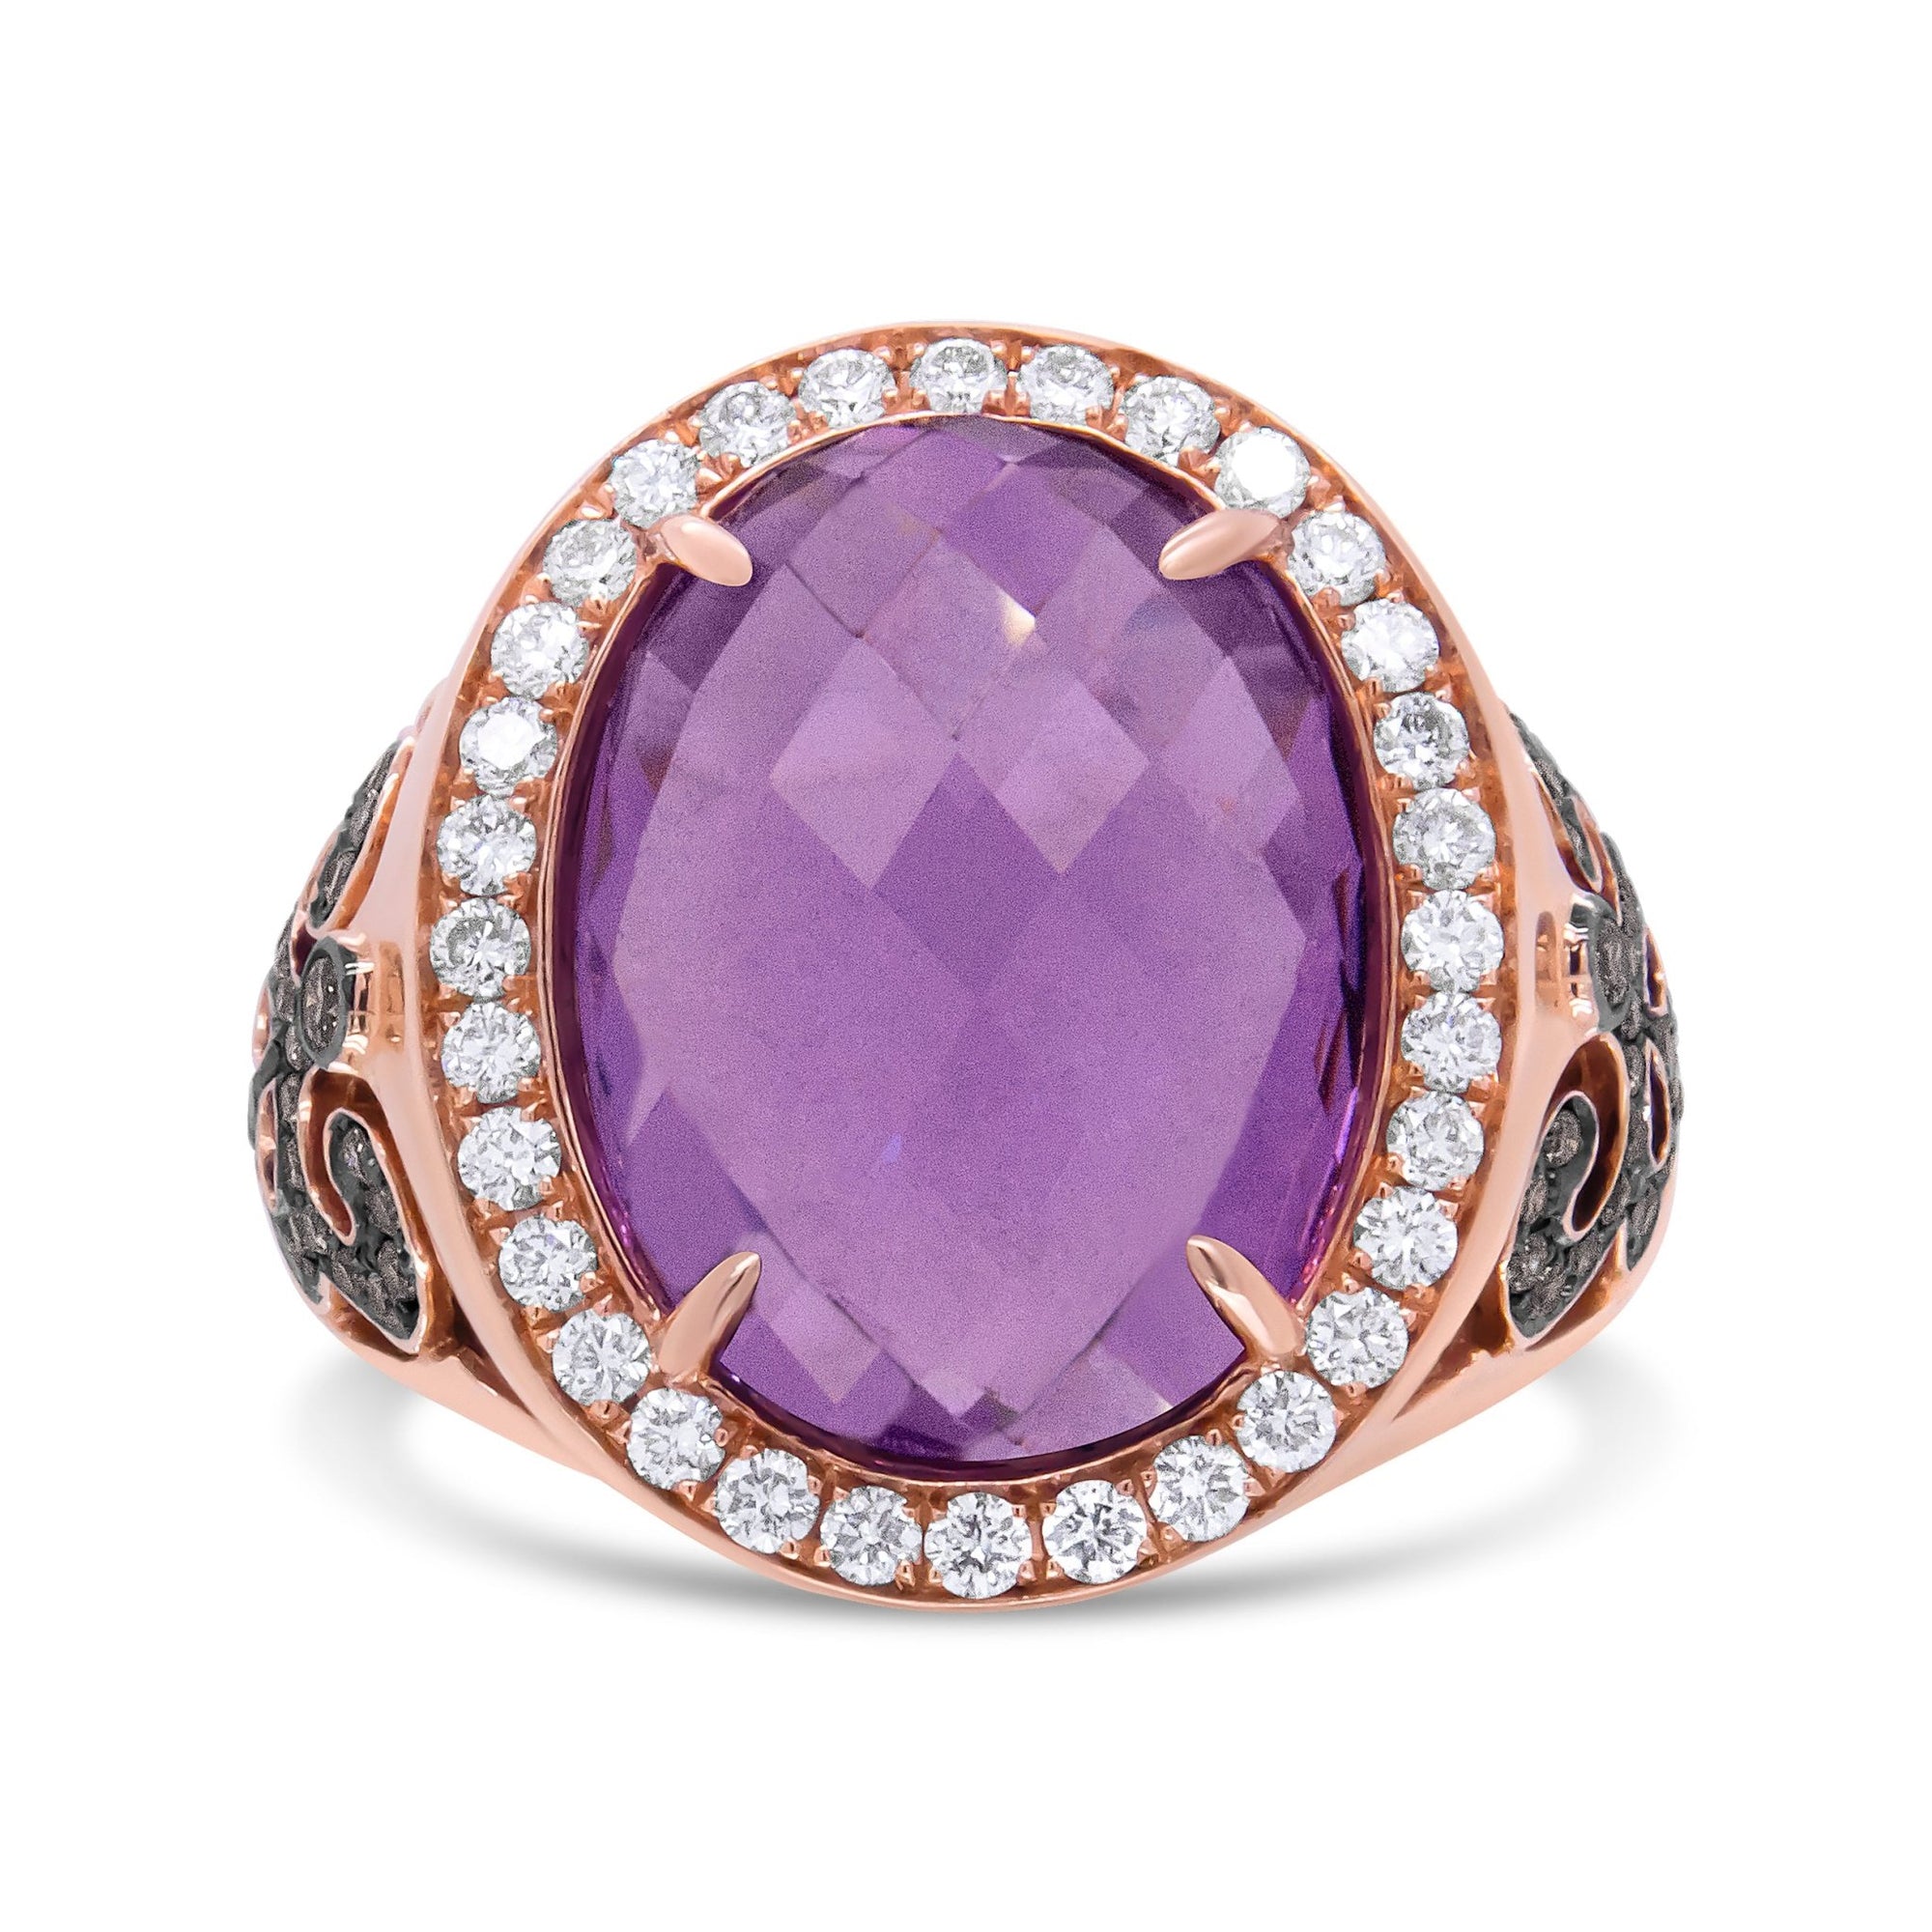 18K Rose Gold 18x13 MM Oval Cut Purplse Amethyst and 1.00 Cttw Diamond Cocktail Ring (Champagne and F-G Color, VS1-VS2 Clarity) - Ring Size 6.5 - LinkagejewelrydesignLinkagejewelrydesign